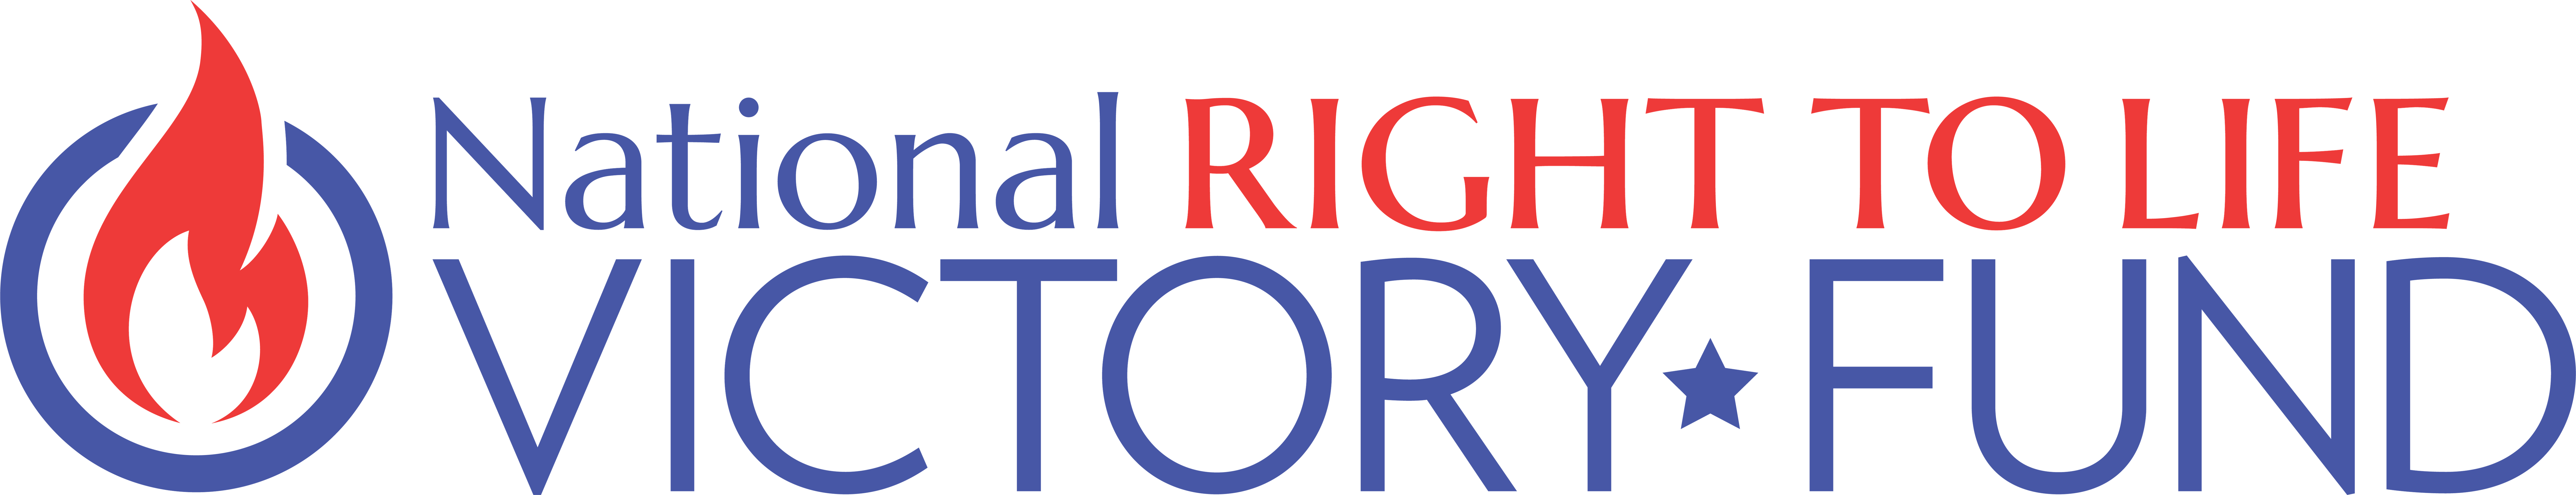 National Right to Life Victory Fund